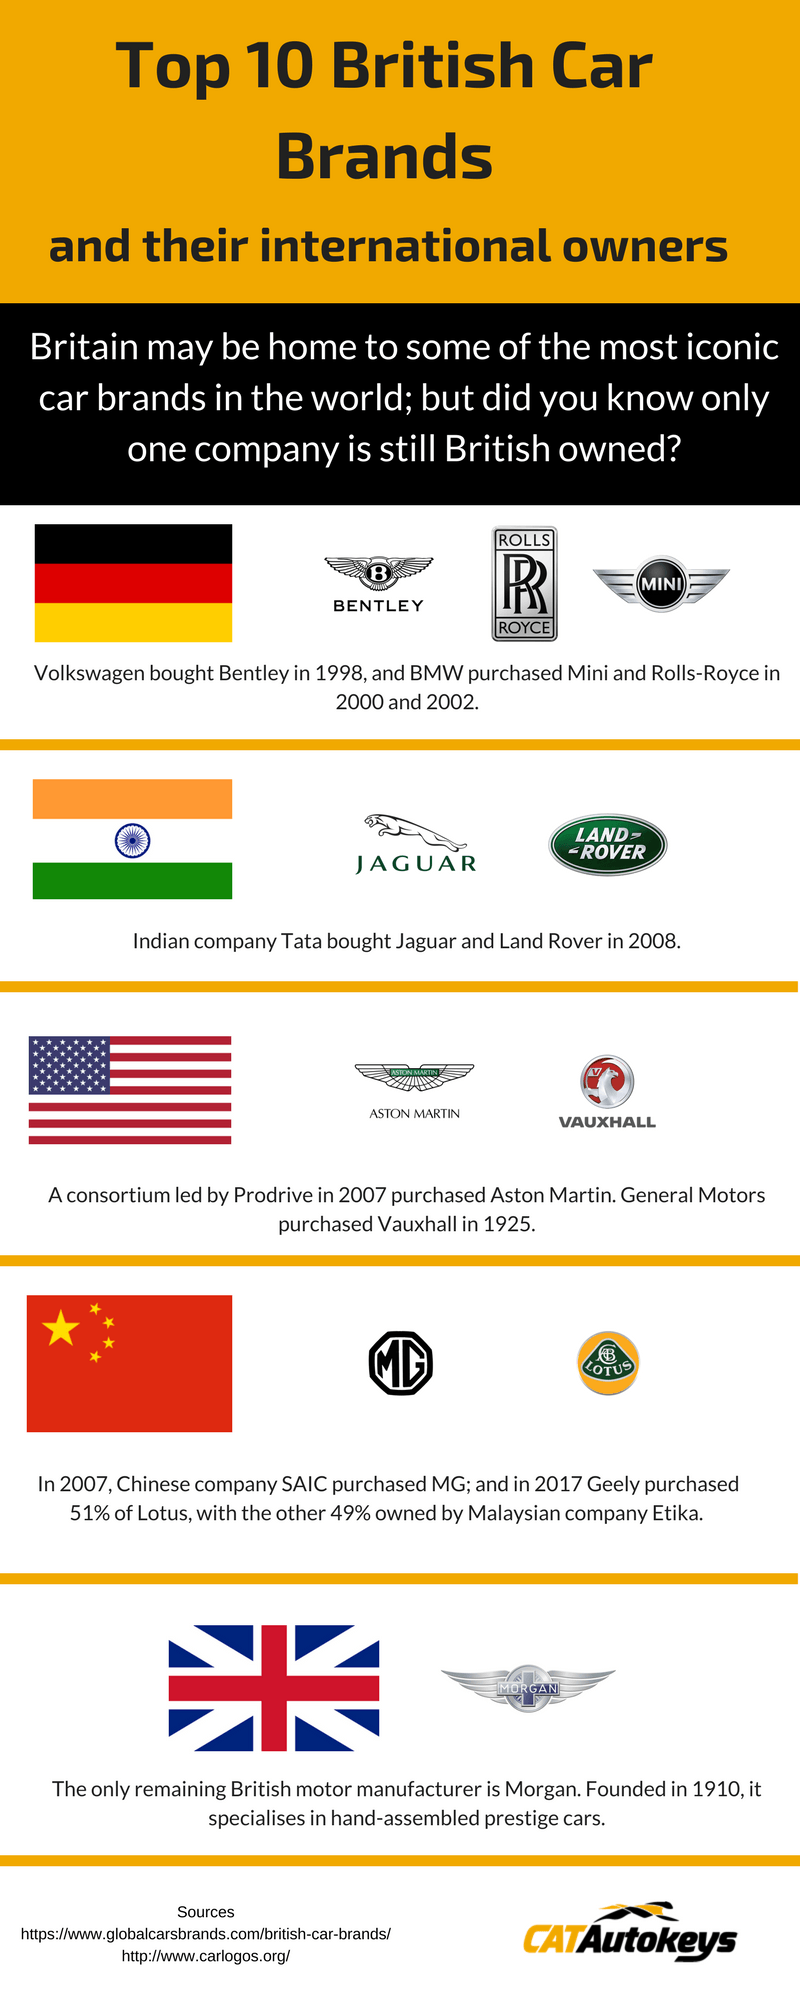 British Car Manufacturers Logo - Top 10 British Car Brands and Their International Owners - CAT Autokeys